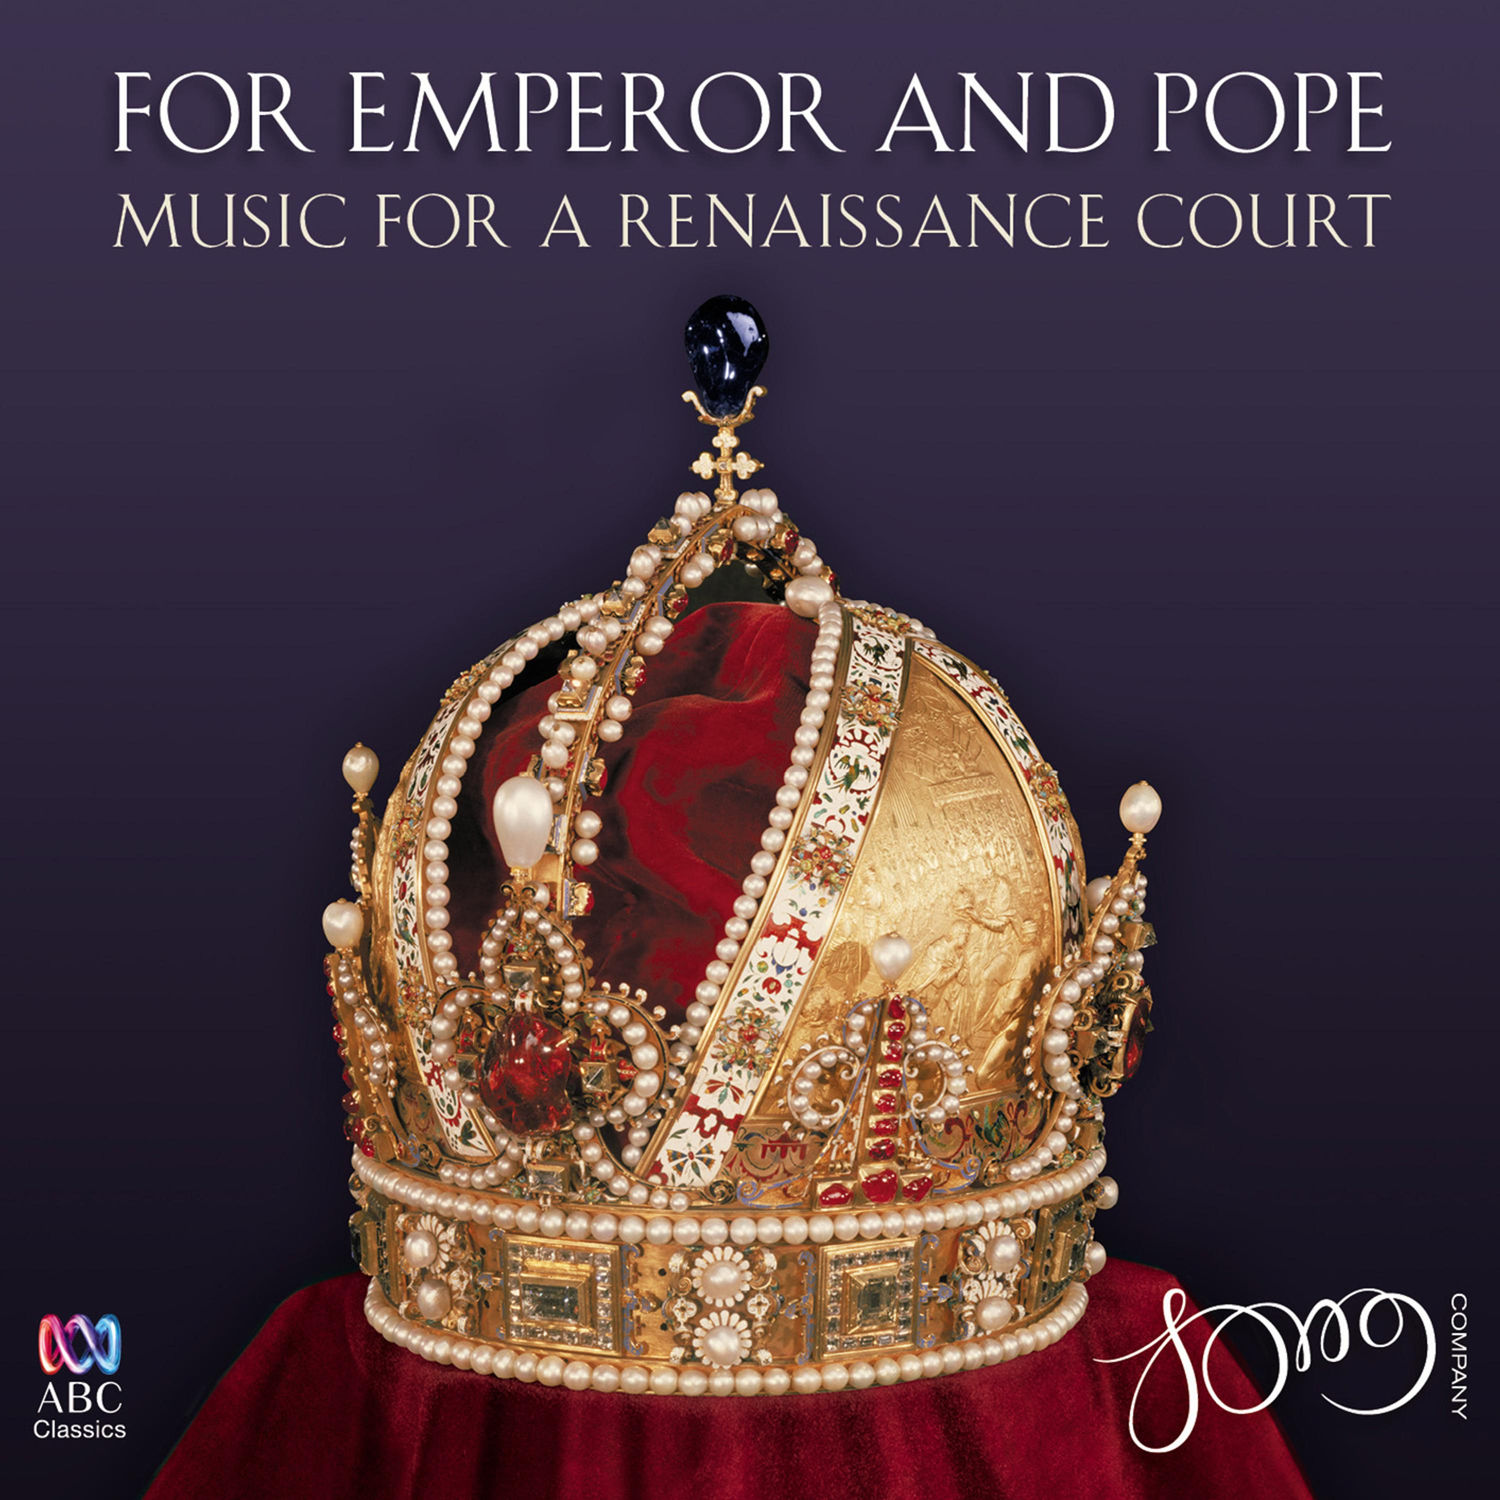 Ens. The Song Company- For Emperor and Pope - Music for a Renaissance Court